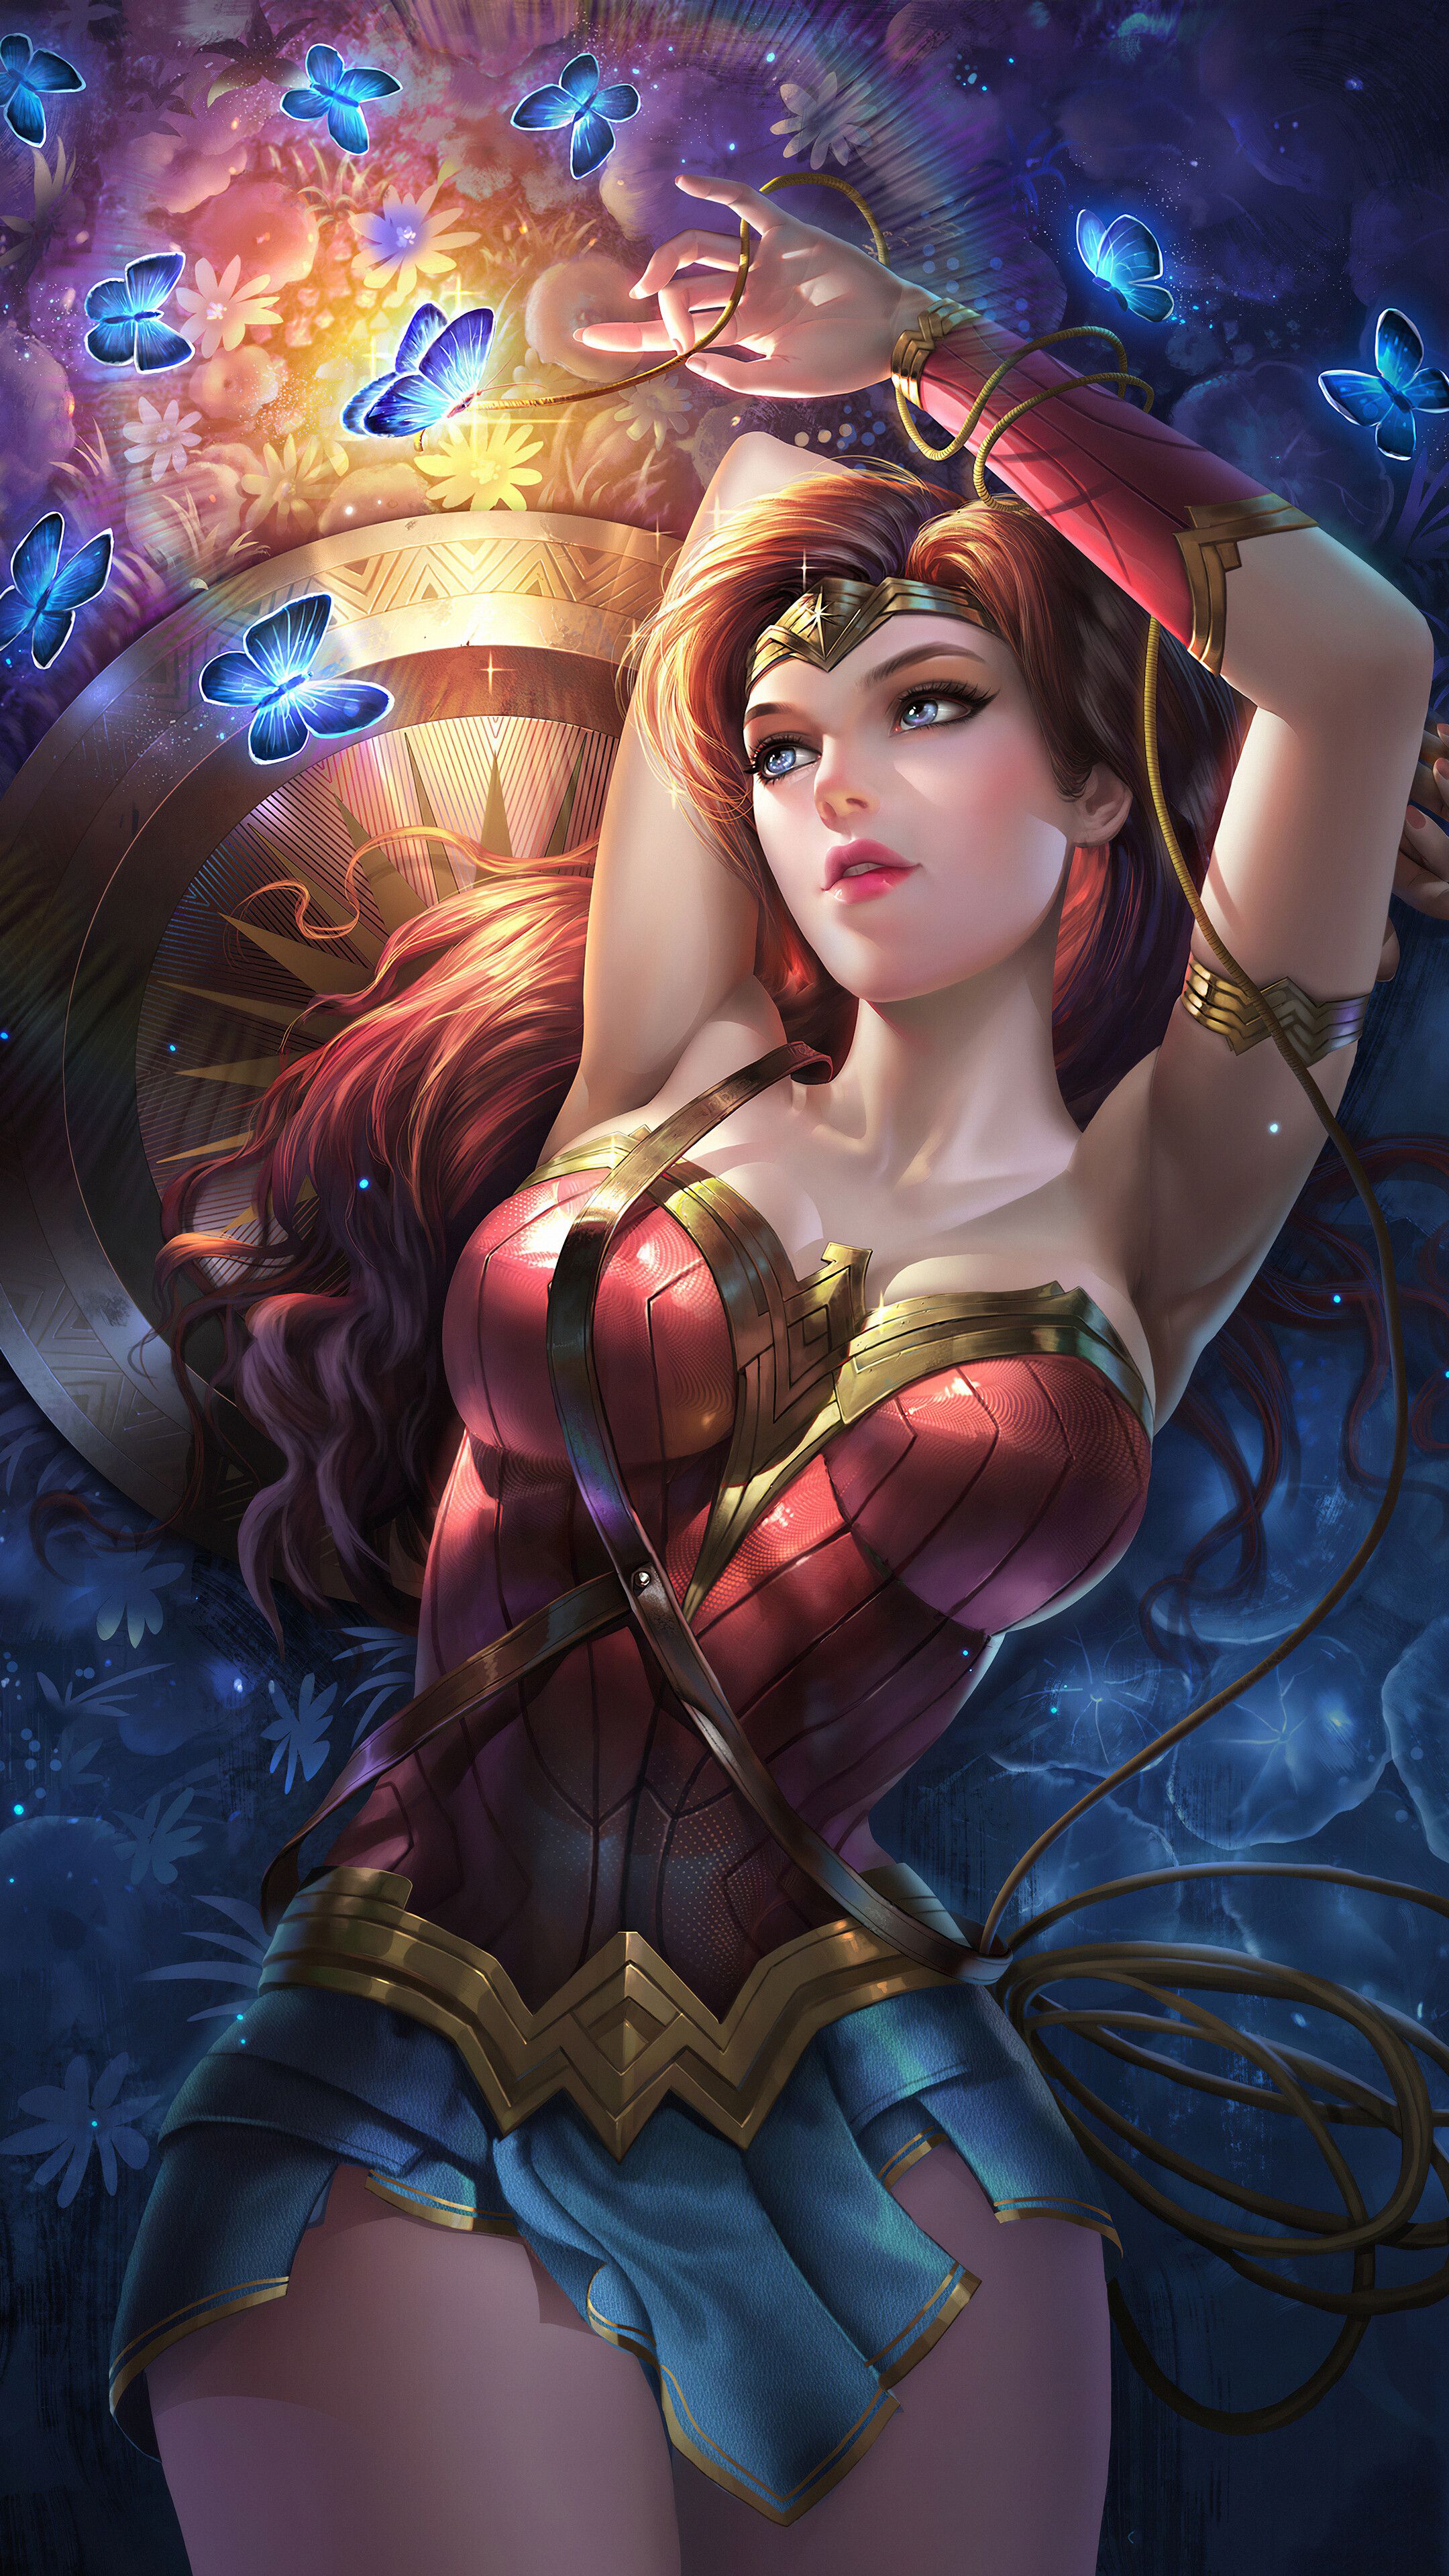 Free download 335012 Wonder Woman iPhone 1076s6 HD Wallpaper Image [2160x3840] for your Desktop, Mobile & Tablet. Explore iPhone For Women Wallpaper. iPhone For Women Wallpaper, Wallpaper for Women, Wallpaper for Women